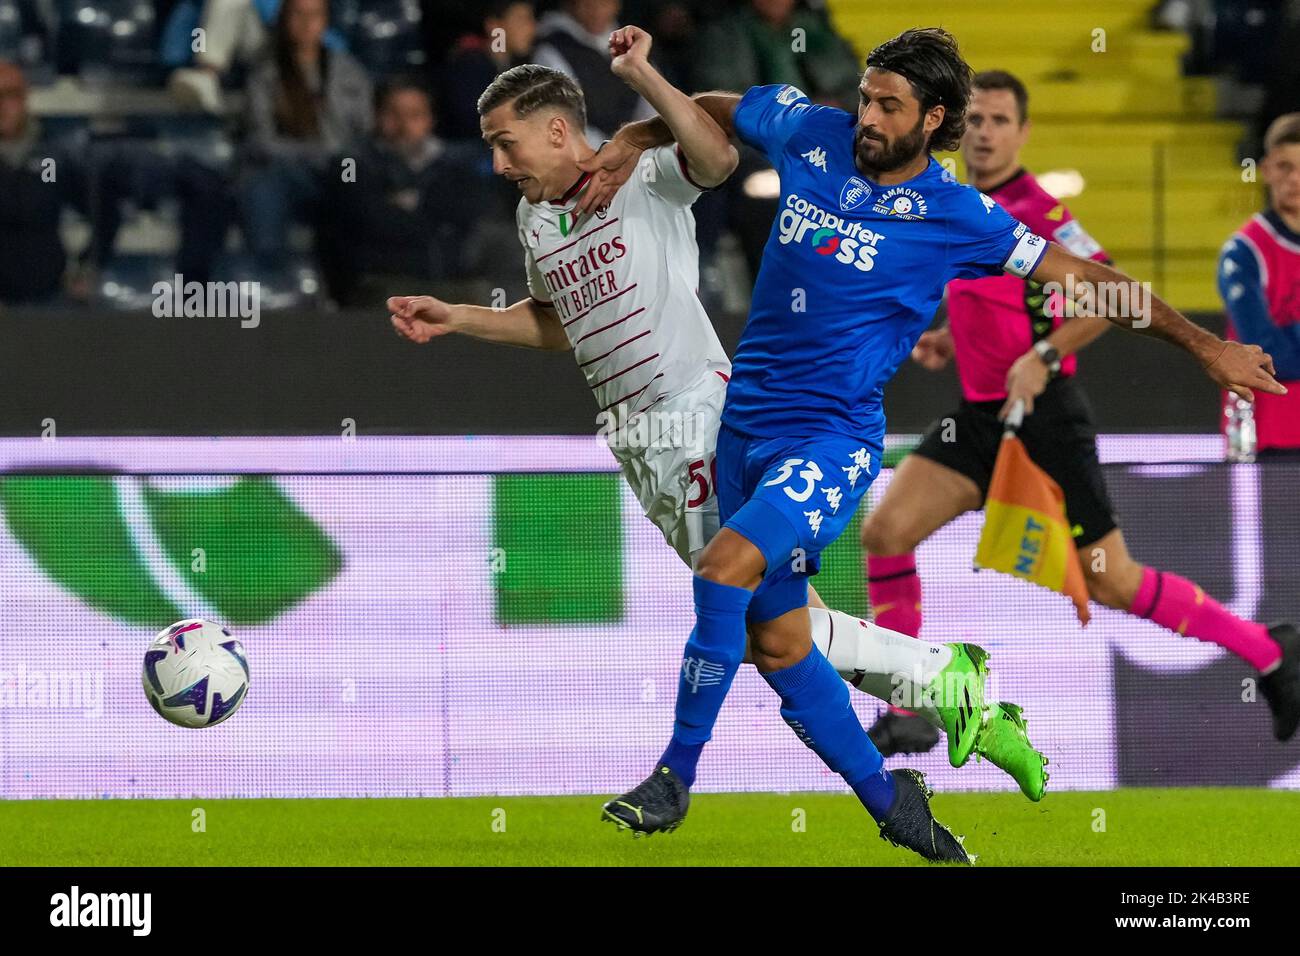 Empoli, Italy. 01st Oct, 2022. Alexis Saelemaekers of AC Milan and Sebastiano Luperto of Empoli FC compete for the ball during the Serie A football match between Empoli FC and AC Milan at Carlo Castellani stadium in Empoli (Italy), October 1st, 2022. Photo Paolo Nucci/Insidefoto Credit: Insidefoto di andrea staccioli/Alamy Live News Stock Photo